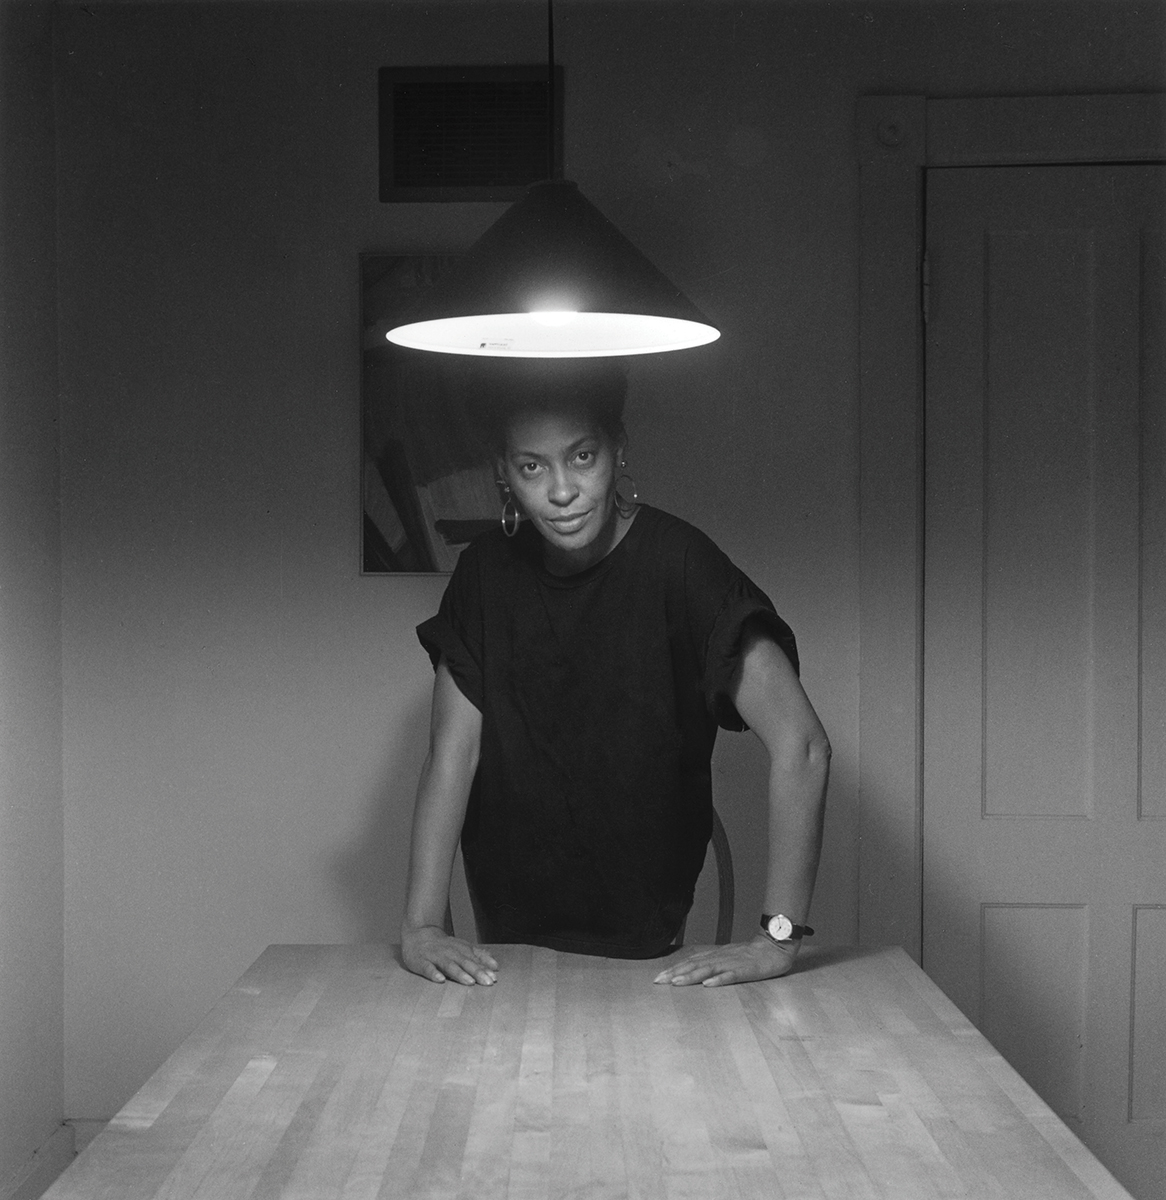 A woman stands with her hands on a kitchen table beneath a hanging lamp, looking directly at the viewer.